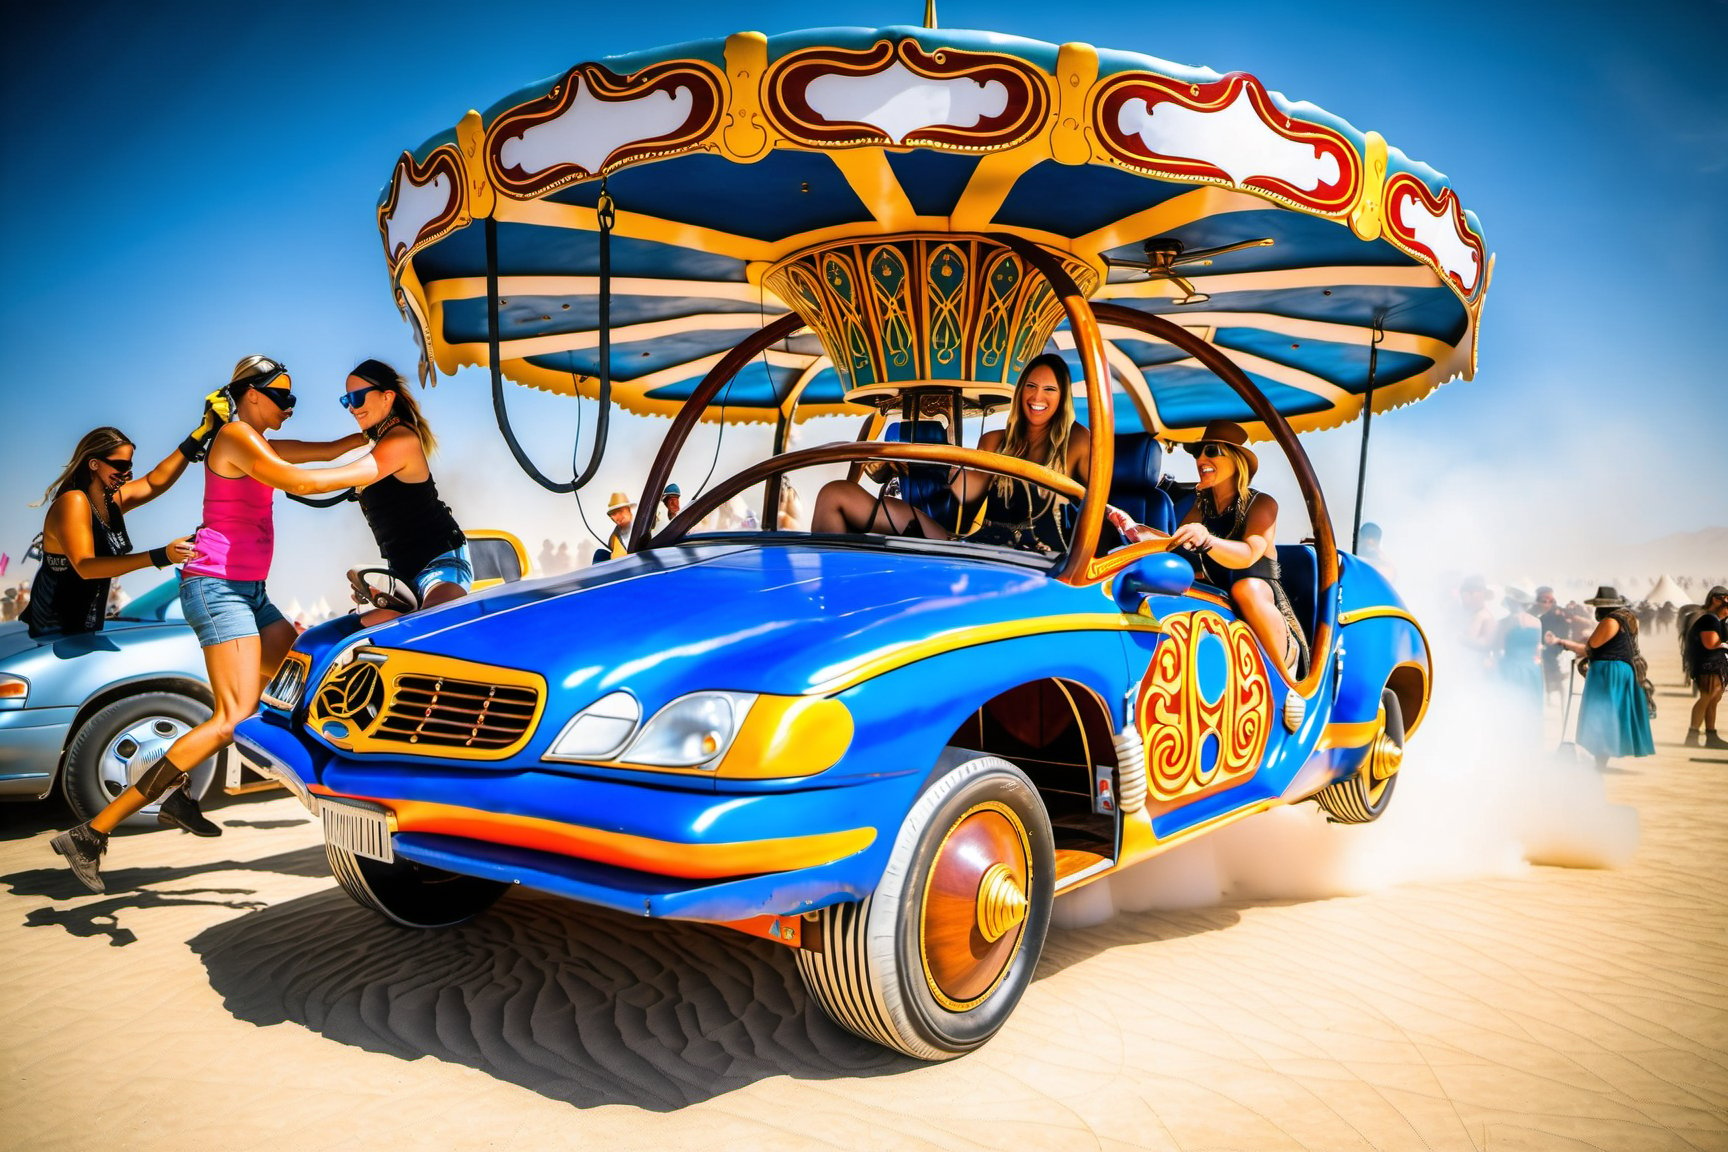 a converted carousel car with hover drive at the burning man festival, without a roof, two control levers serve as steering wheels. two ladies are cleaning the car while squatting.